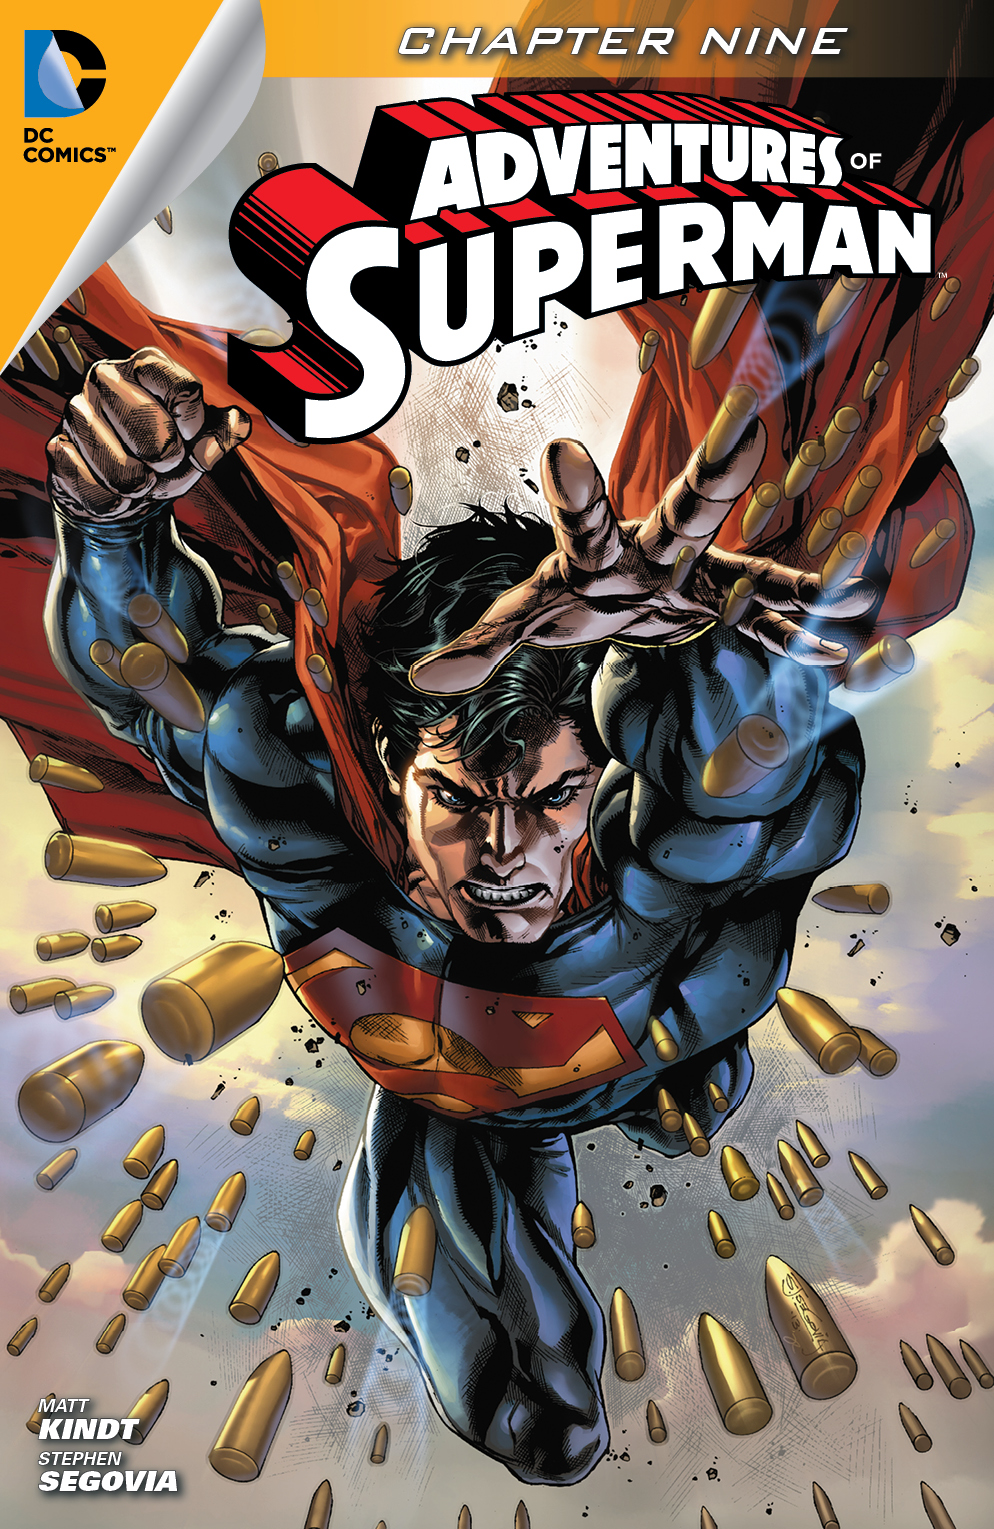 Adventures of Superman (2013-) #9 preview images